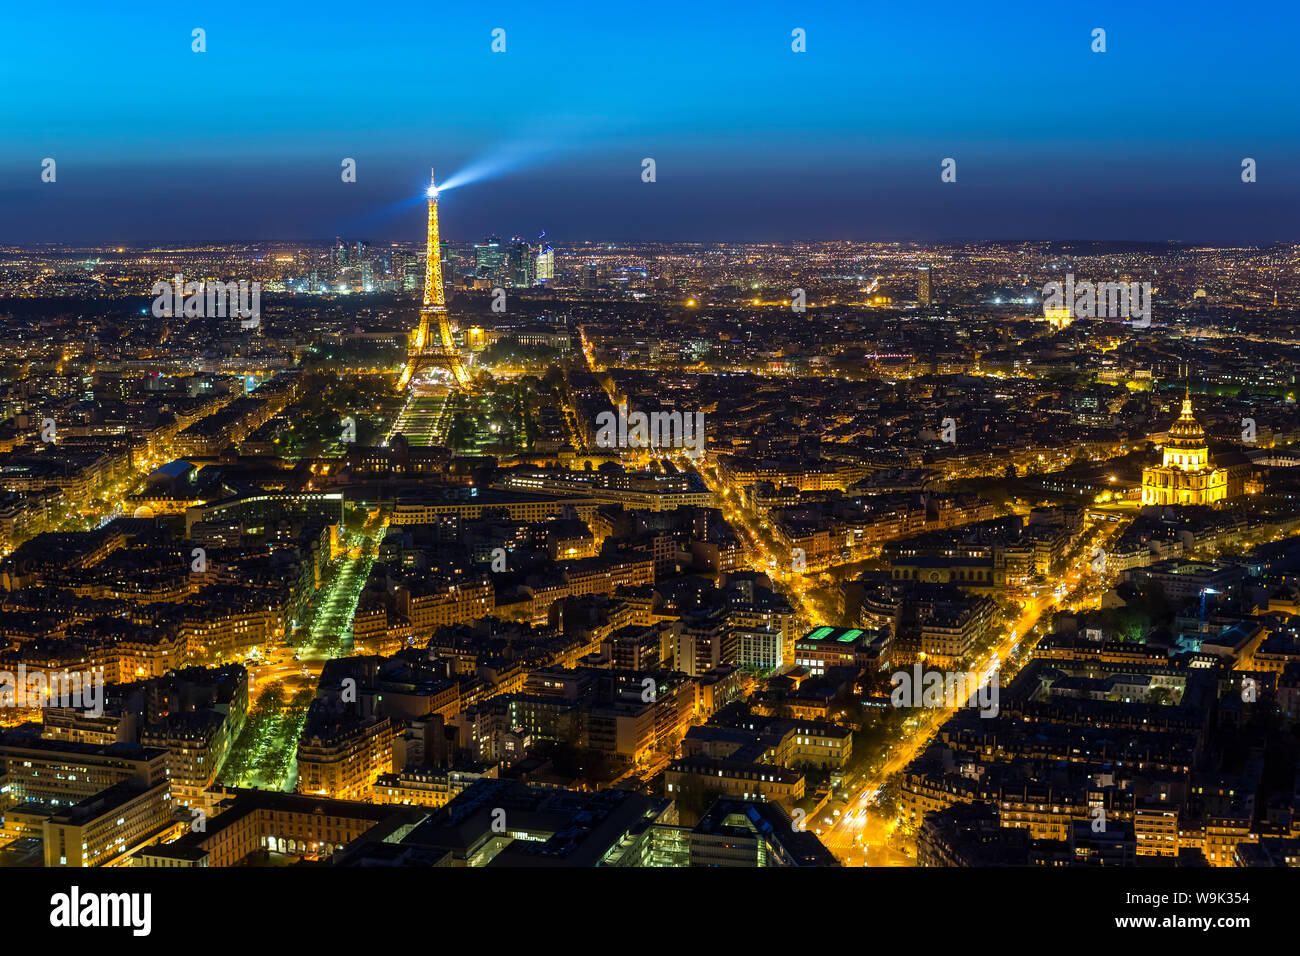 Elevated view of the Eiffel Tower, city skyline and La Defense skyscraper district in the distance, Paris, France, Europe Stock Photo